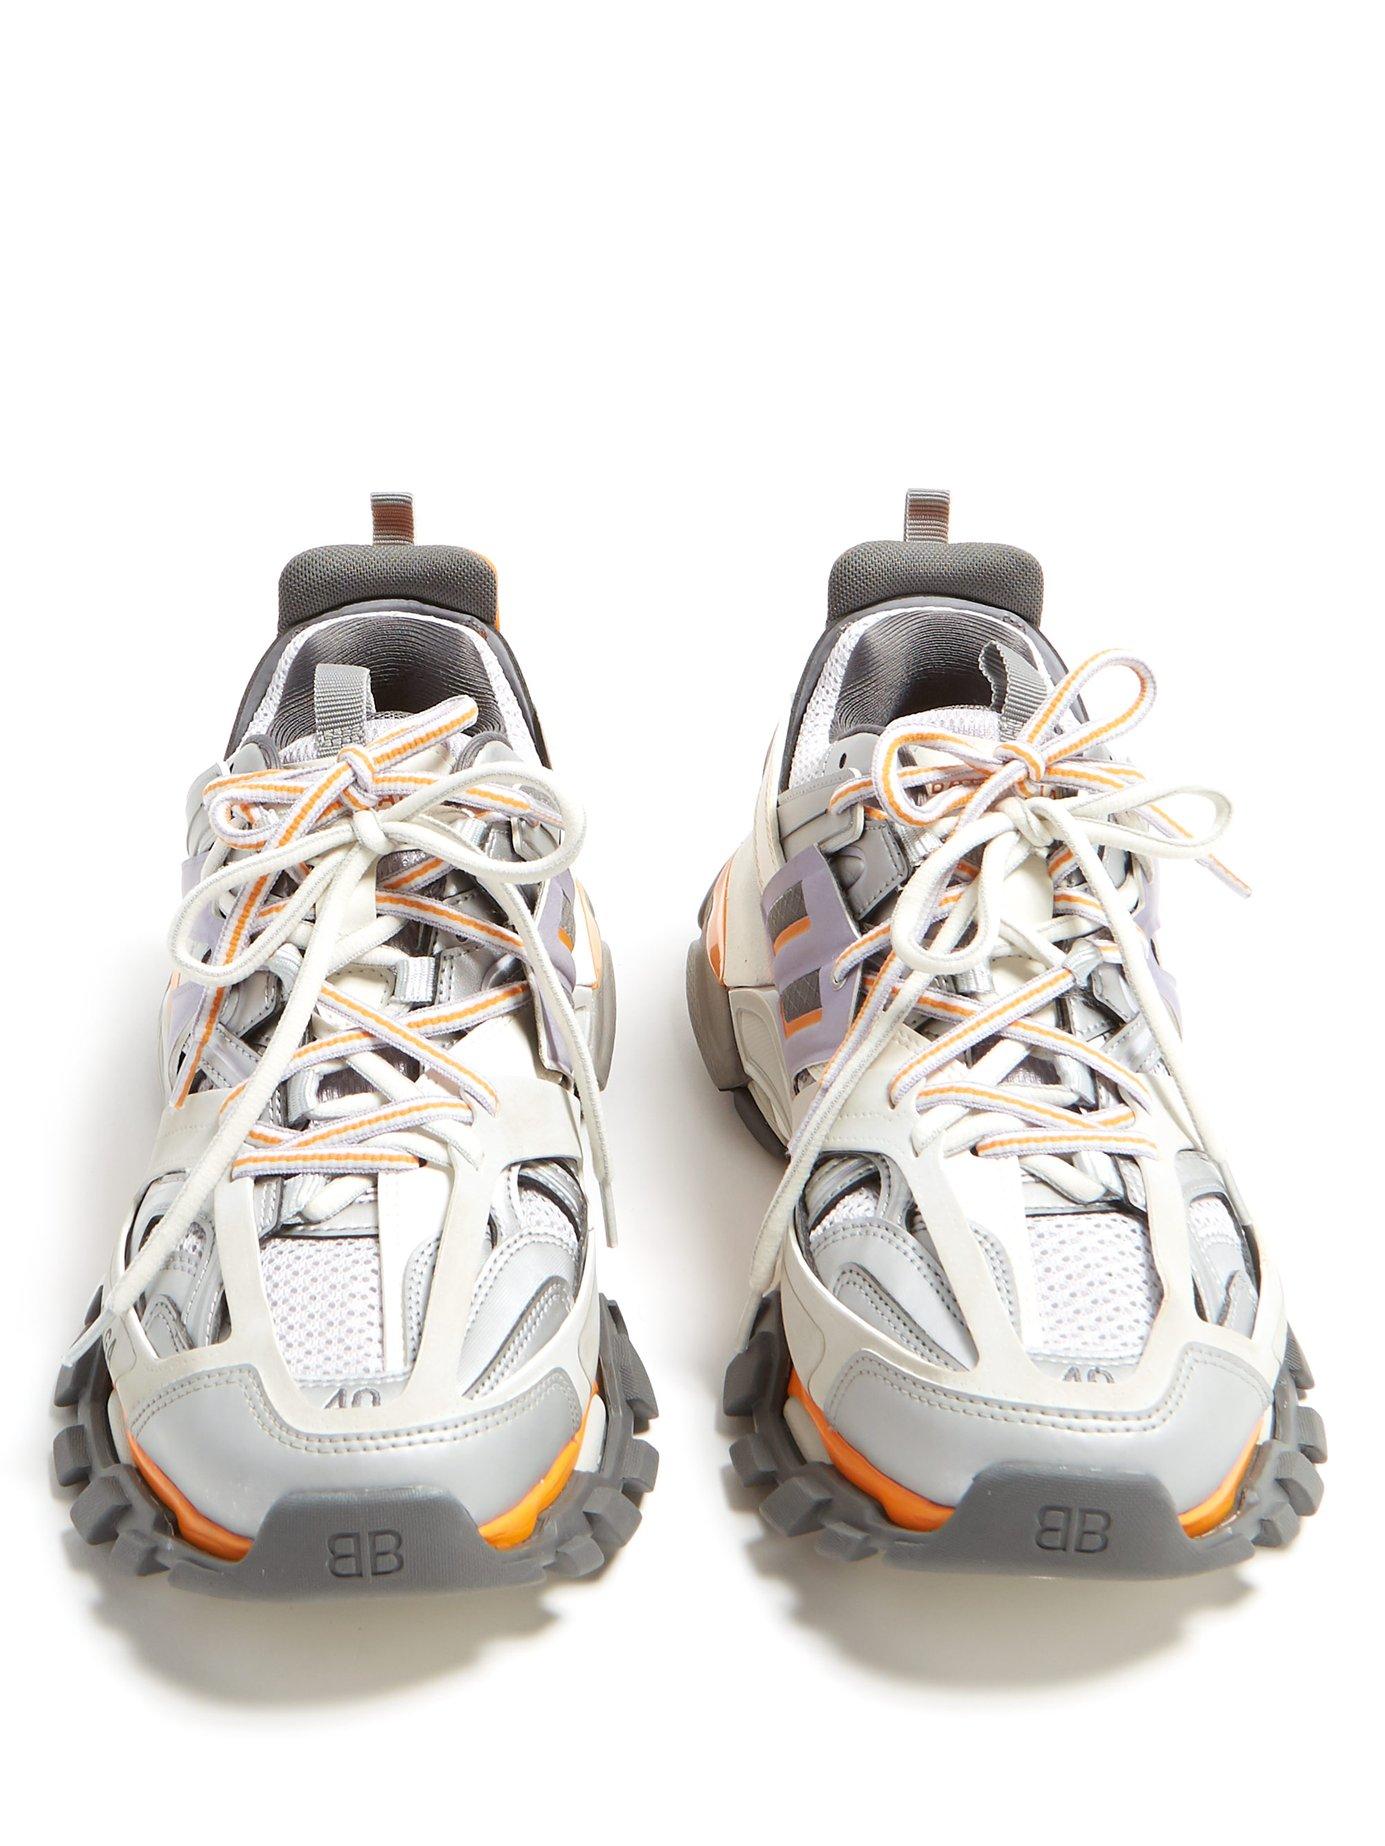 Balenciaga Grey And Purple Track Sneakers in Gray | Lyst